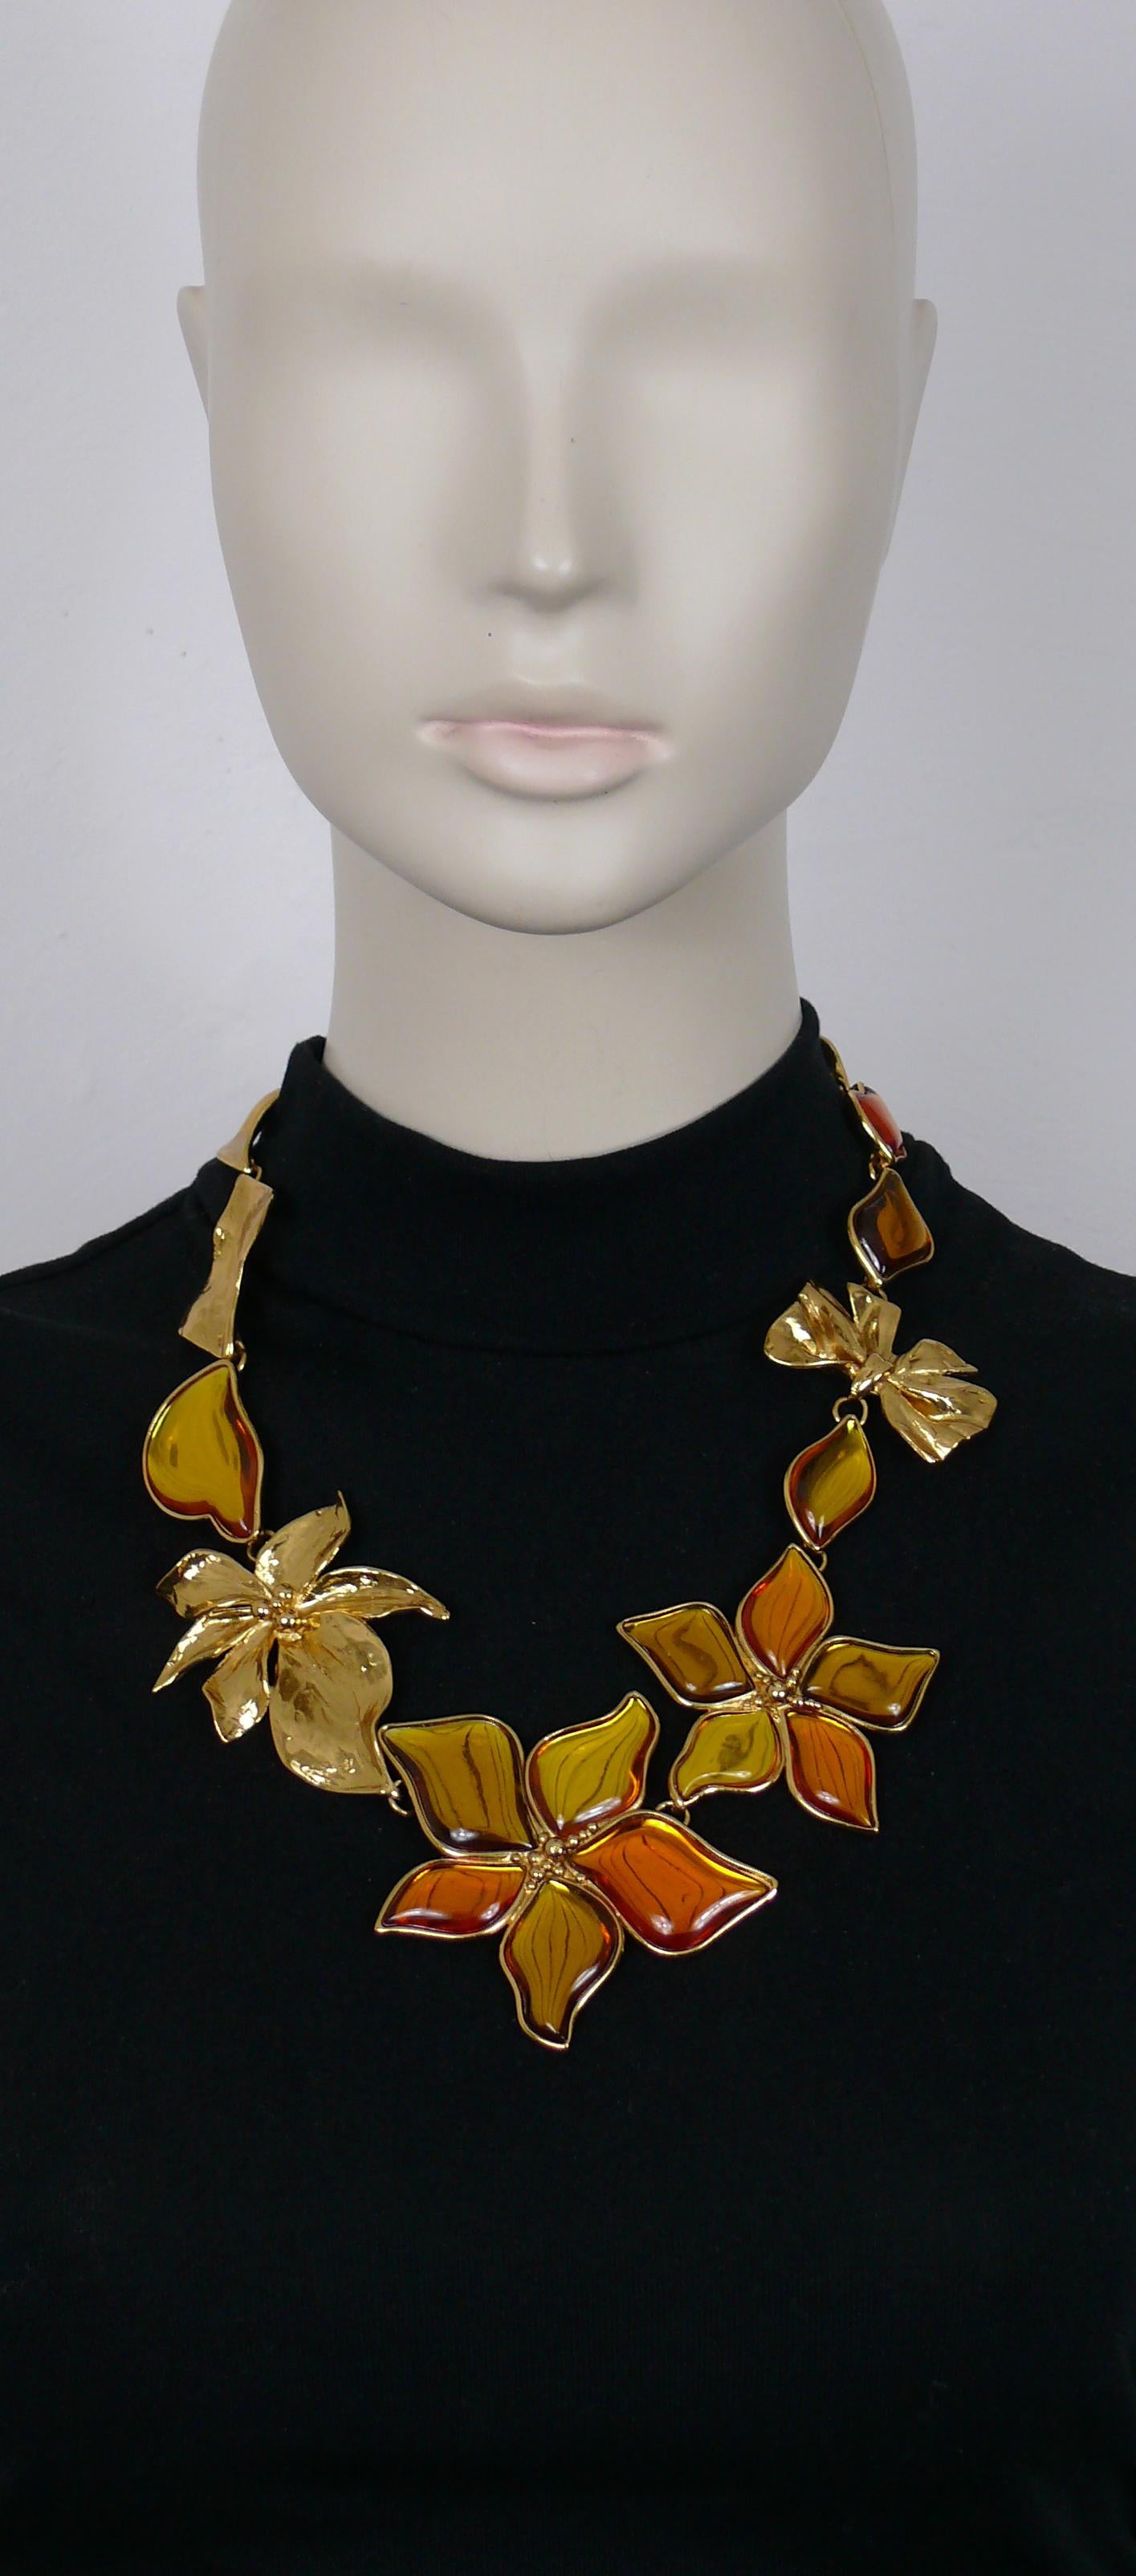 JEAN LOUIS SCHERRER gorgeous vintage gold toned necklace featuring textured bows, leaves and flowers embellished with orange/yellow resin cabochons.

Panther head spring clasp.
Adjustable length.

Marked SCHERRER Paris Made in France.

Indicative